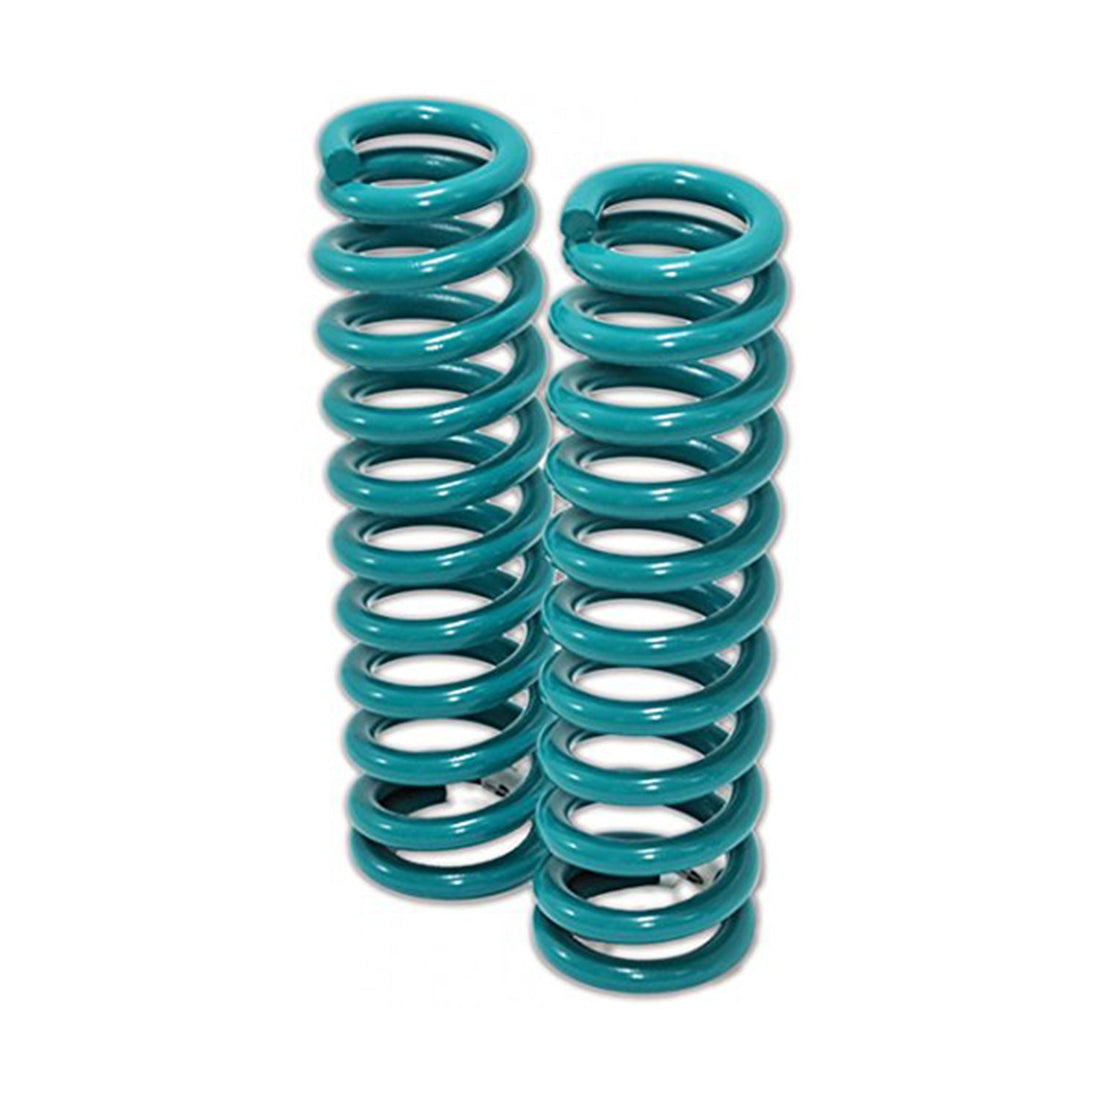 Dobinsons Rear Coil Springs for Toyota Landcruiser 200 series 4.5L diesel engine 2008-2021 Armored Vehicles Only (C59-563)